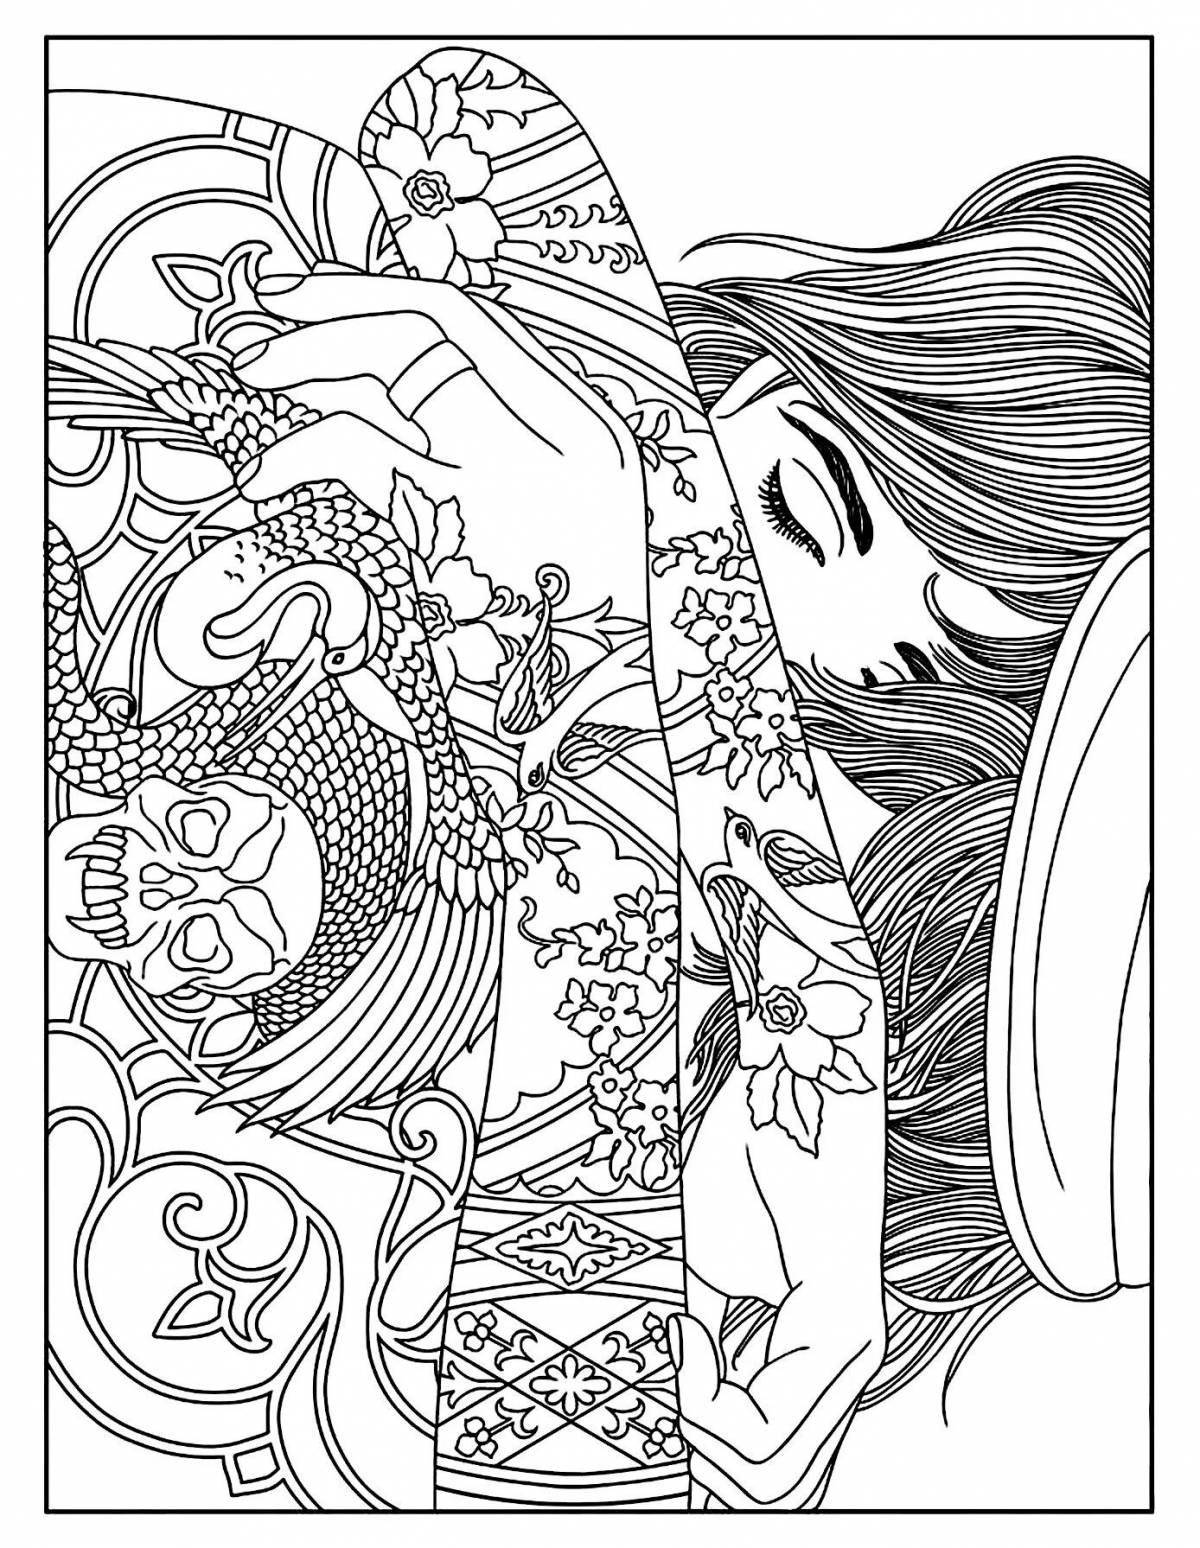 Unique modern coloring book for adults